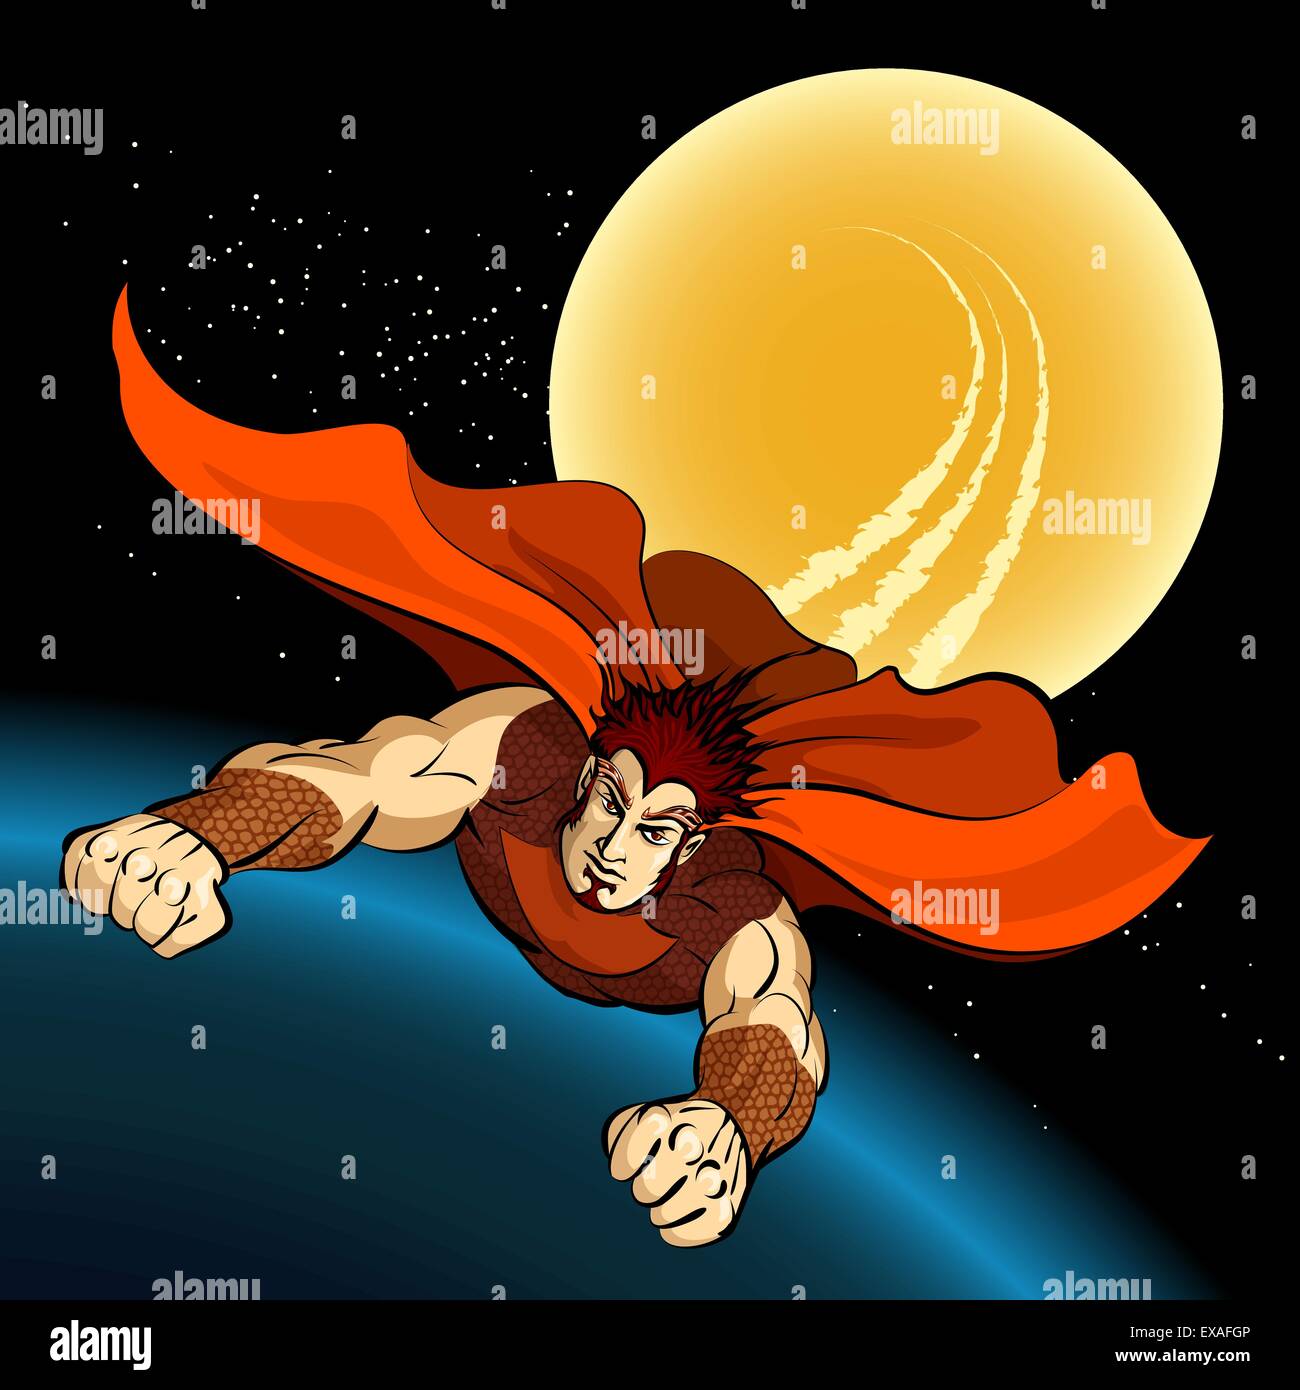 Super Hero flying above a planet.Comic book style illustration. Stock Vector